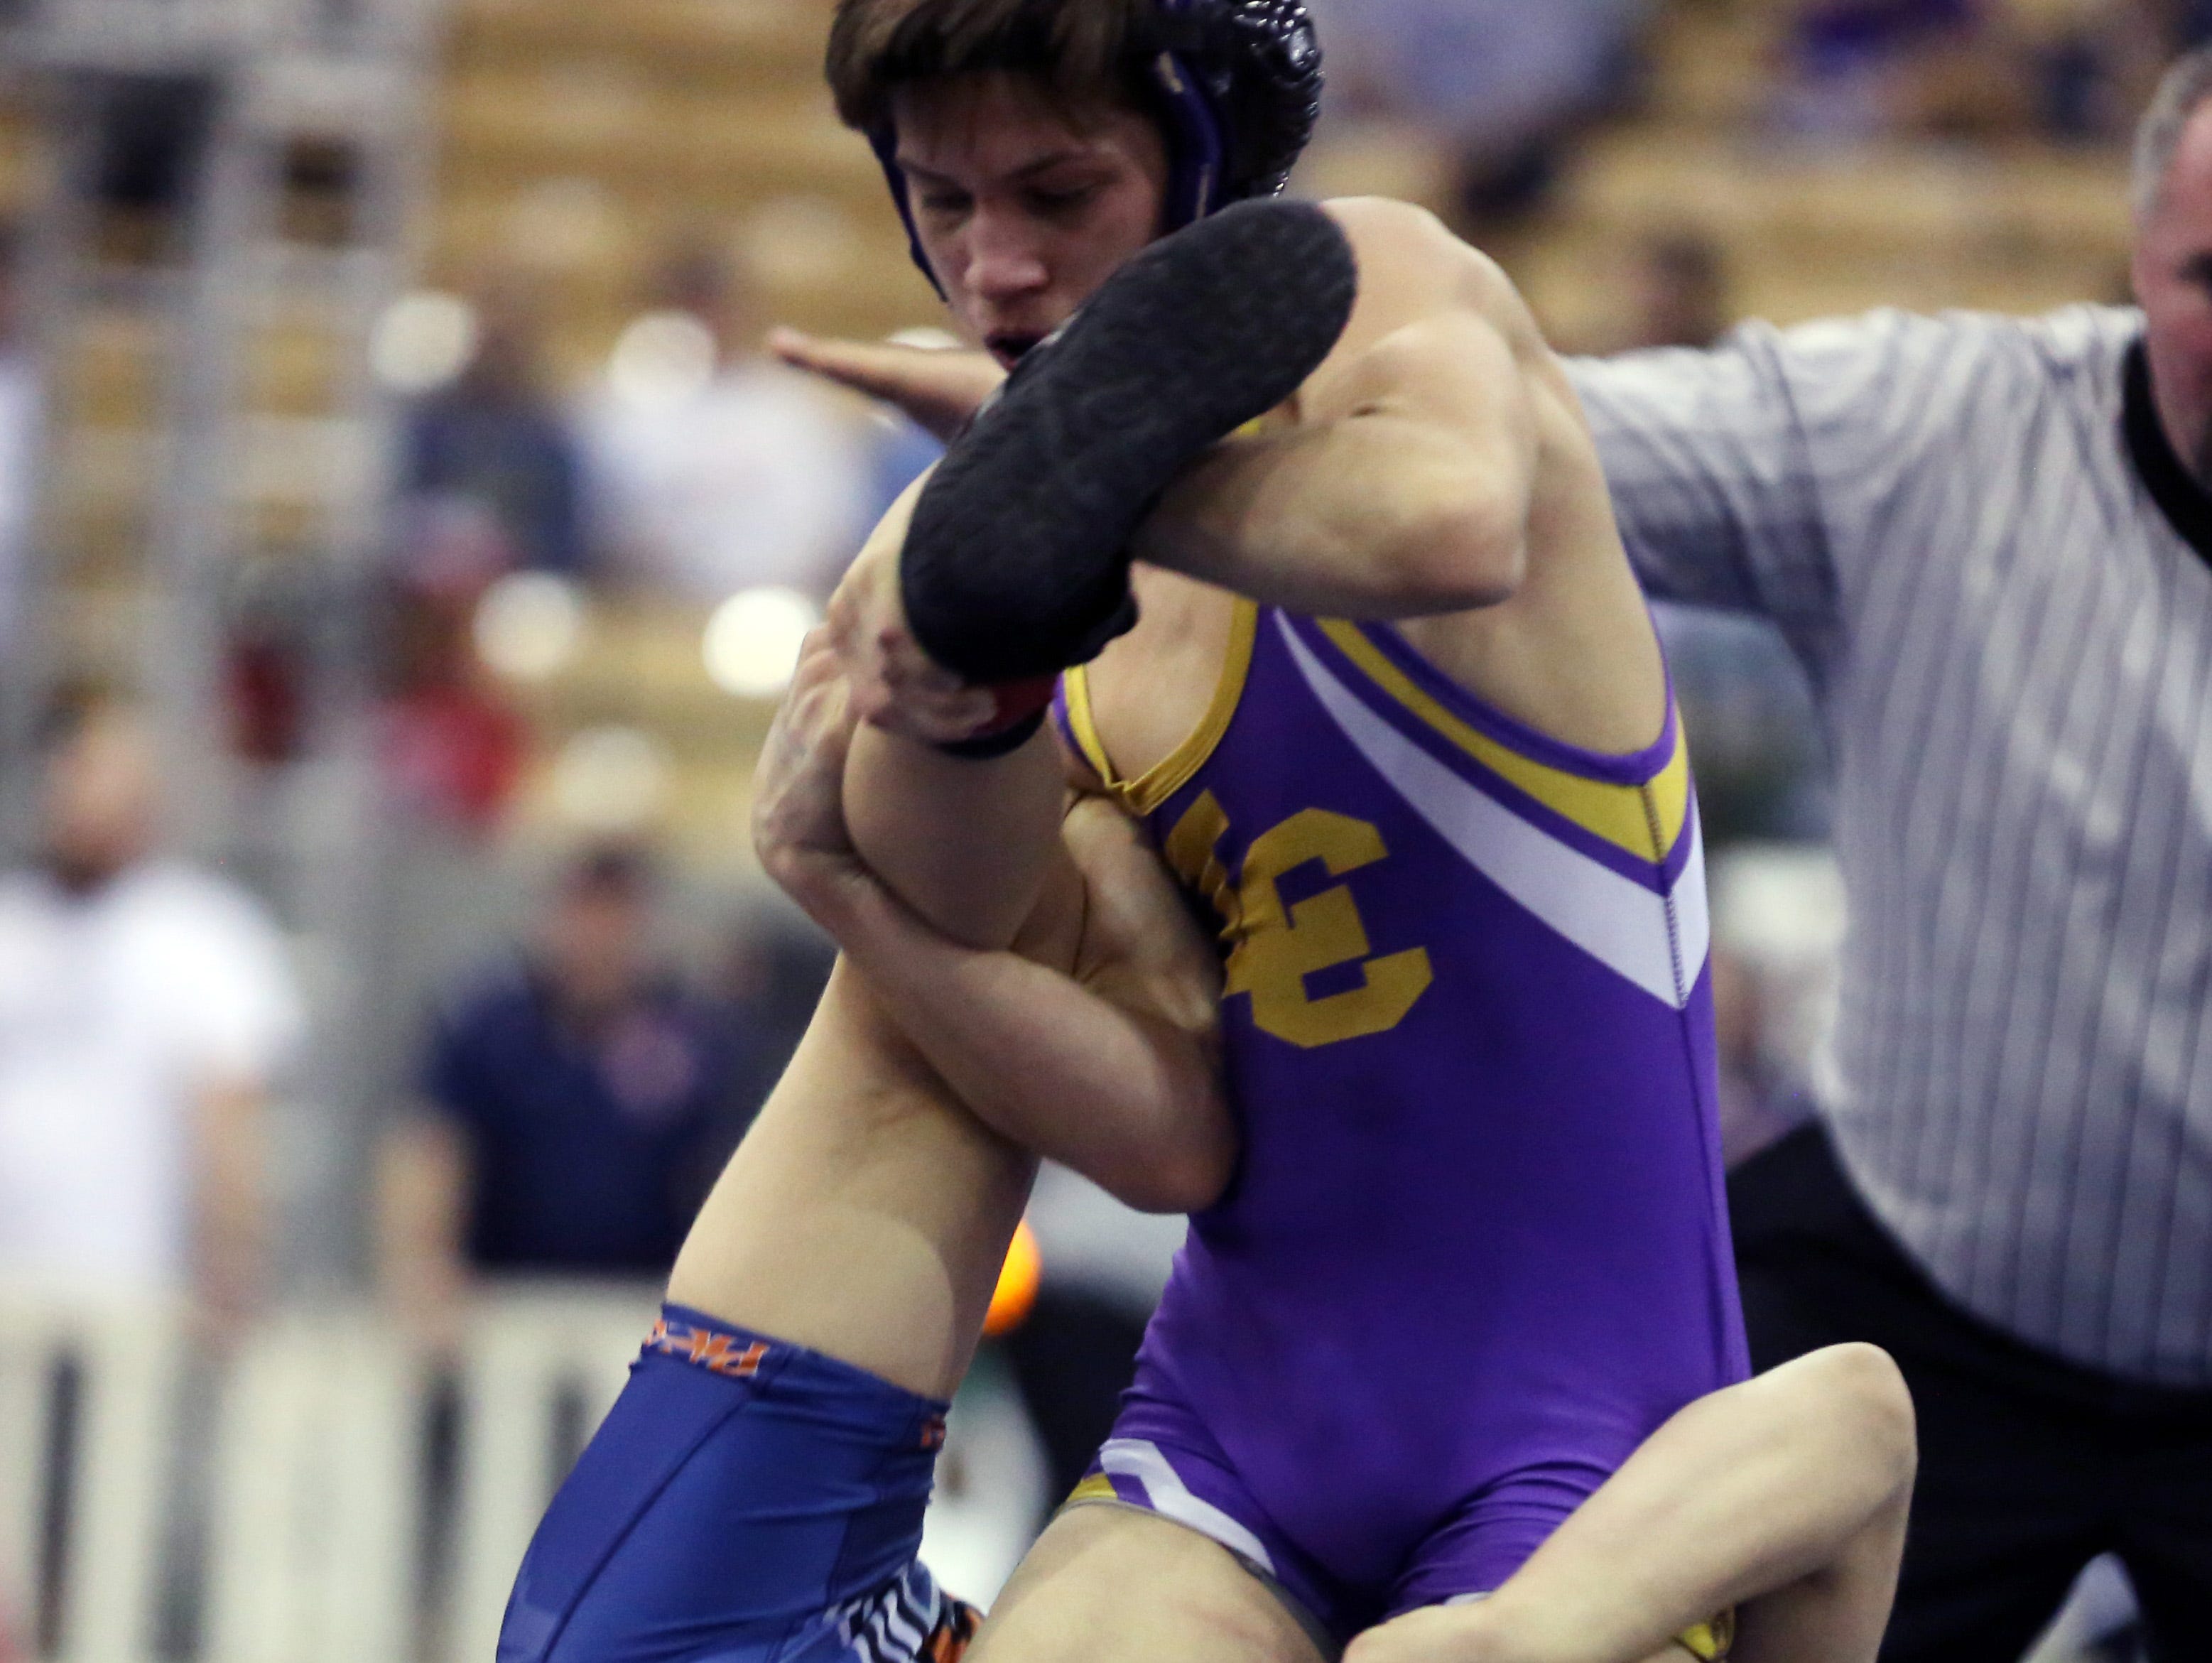 Beech High School's Brayden Palmer, back, in blue and orange, competes with Luke Dezember of Lawrence, standing in purple, white and yellow, during the 106-pound semifinals at the TSSAA State Wrestling Tournament Friday.